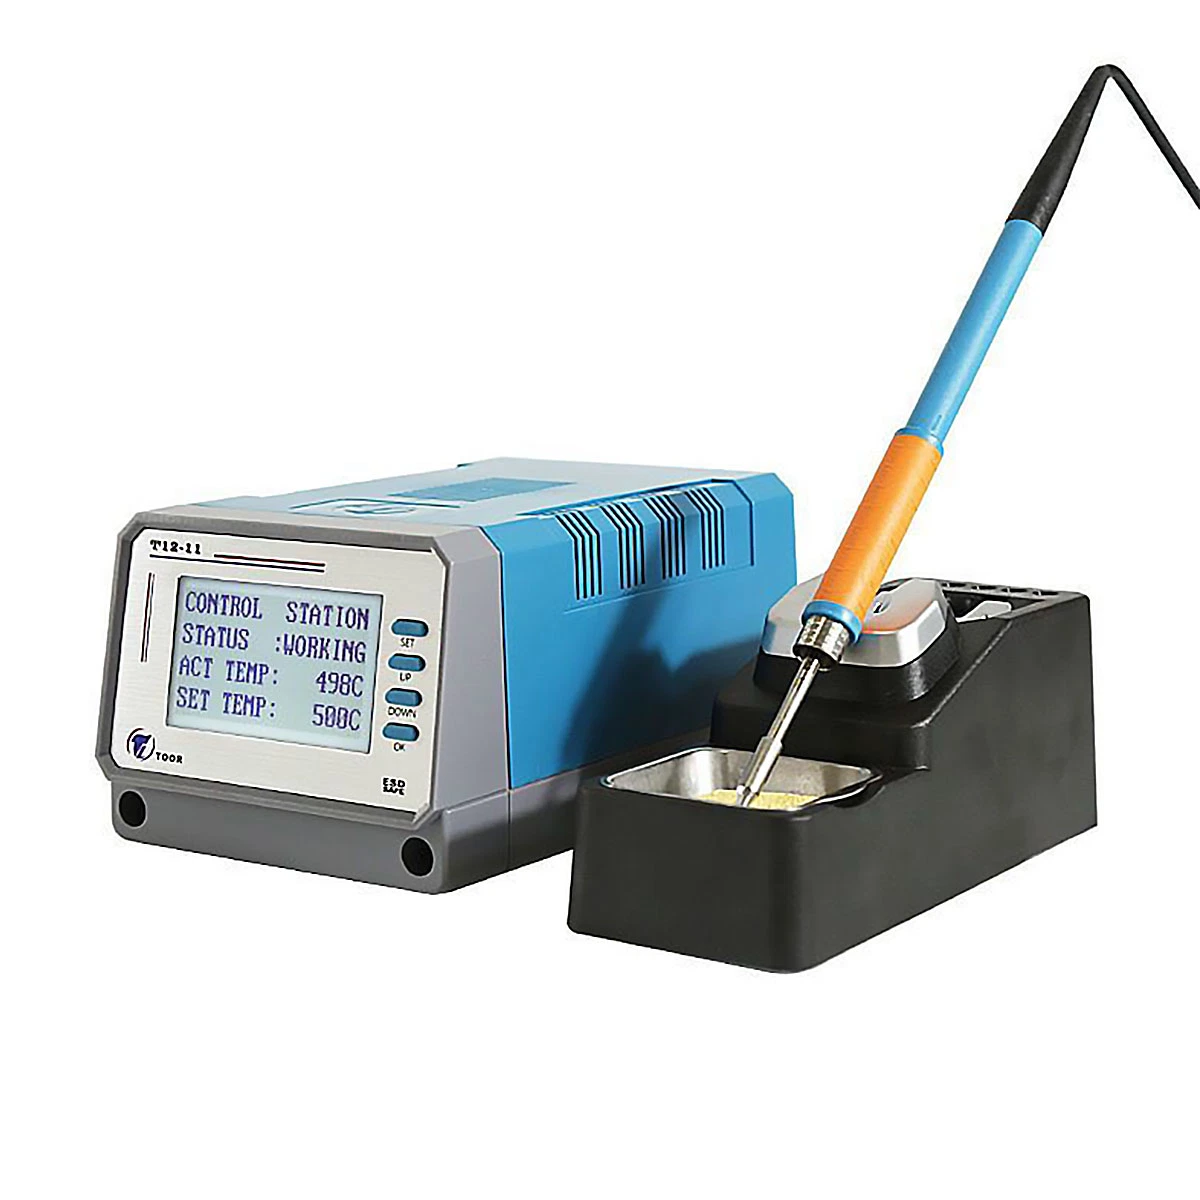 Electric Iron Solder 40/60W Multifunctional Electric Soldering Iron Set 220V Household Solder Iron